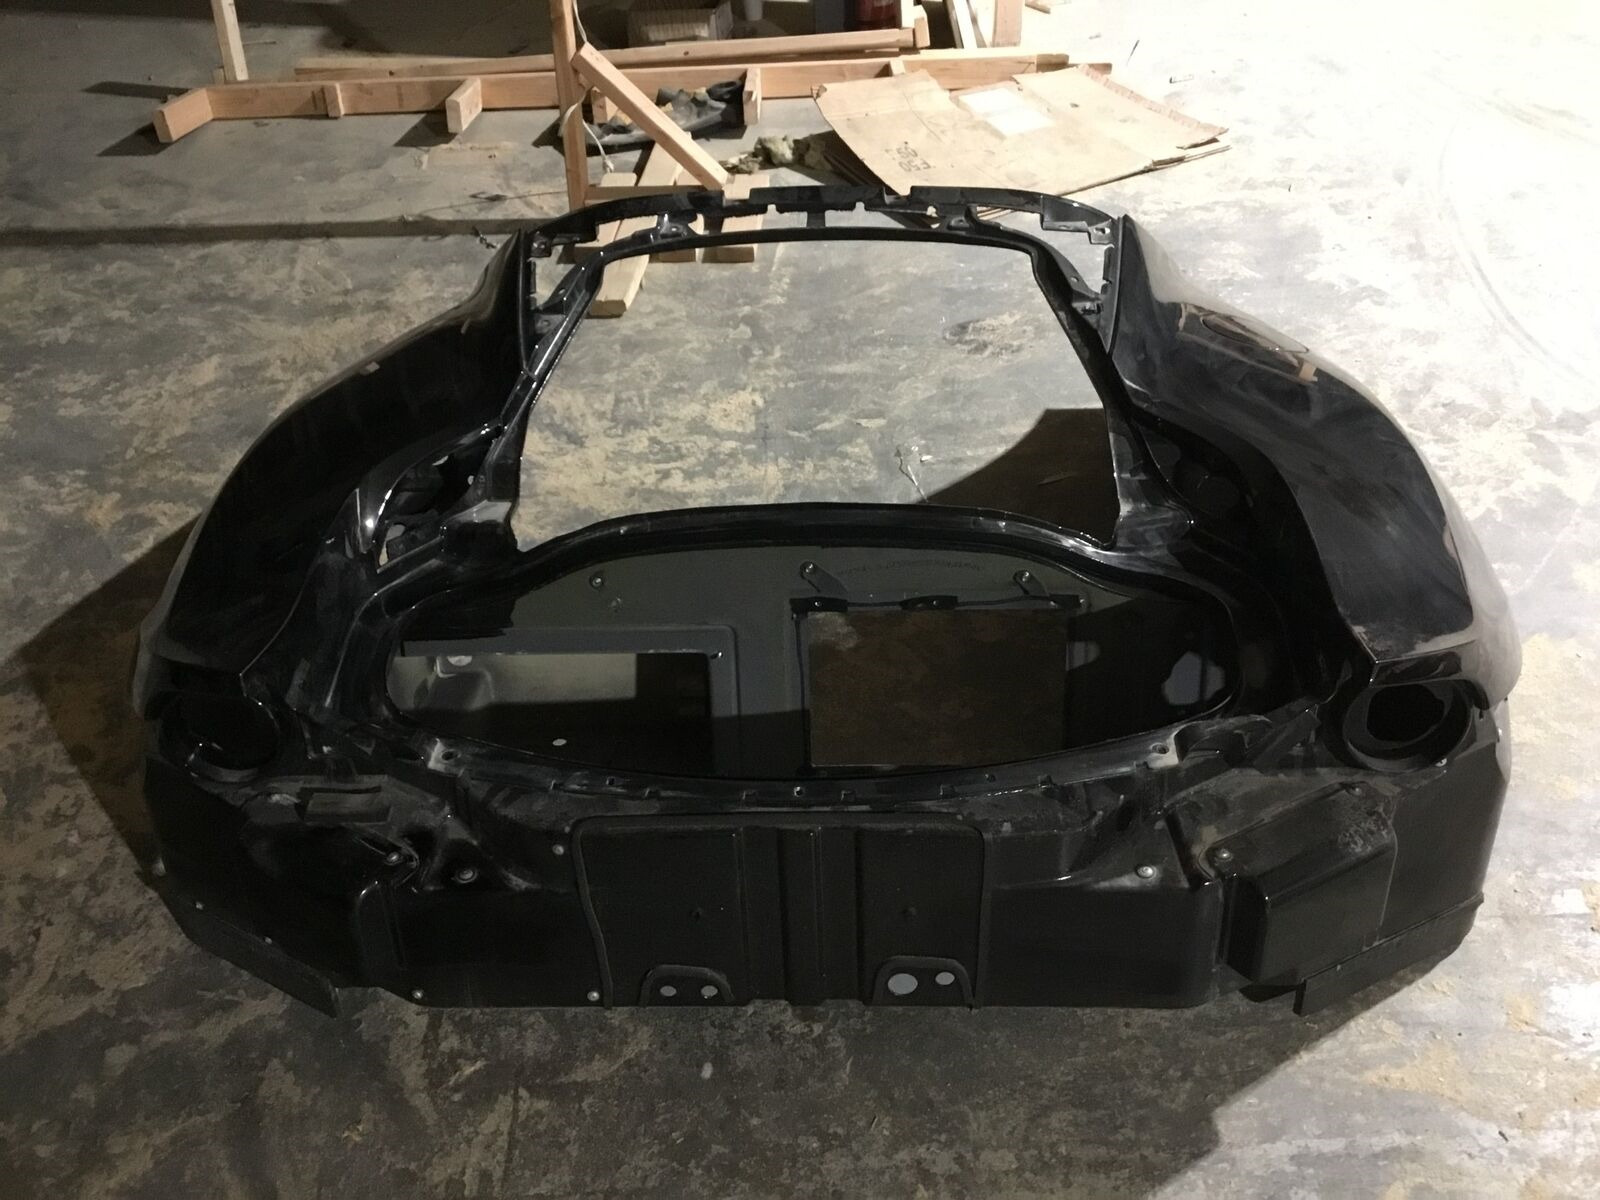 Lotus Evora S 2014 Rear Clam Clamshell Frame Shell Body Structure 10-14 $5